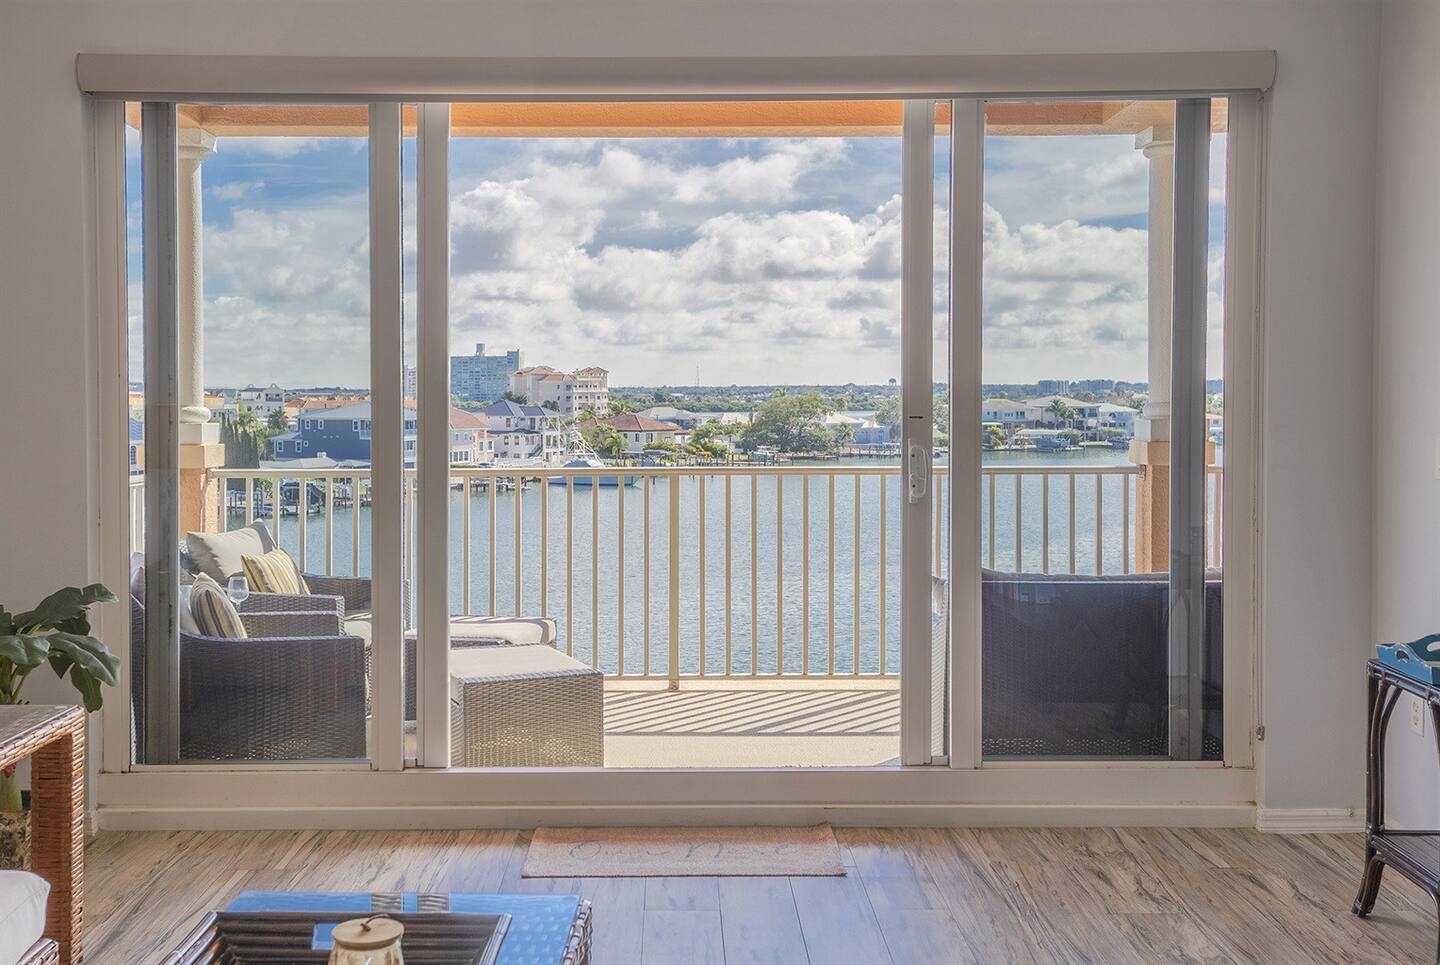 Panoramic Views Of Bay From Living Area
